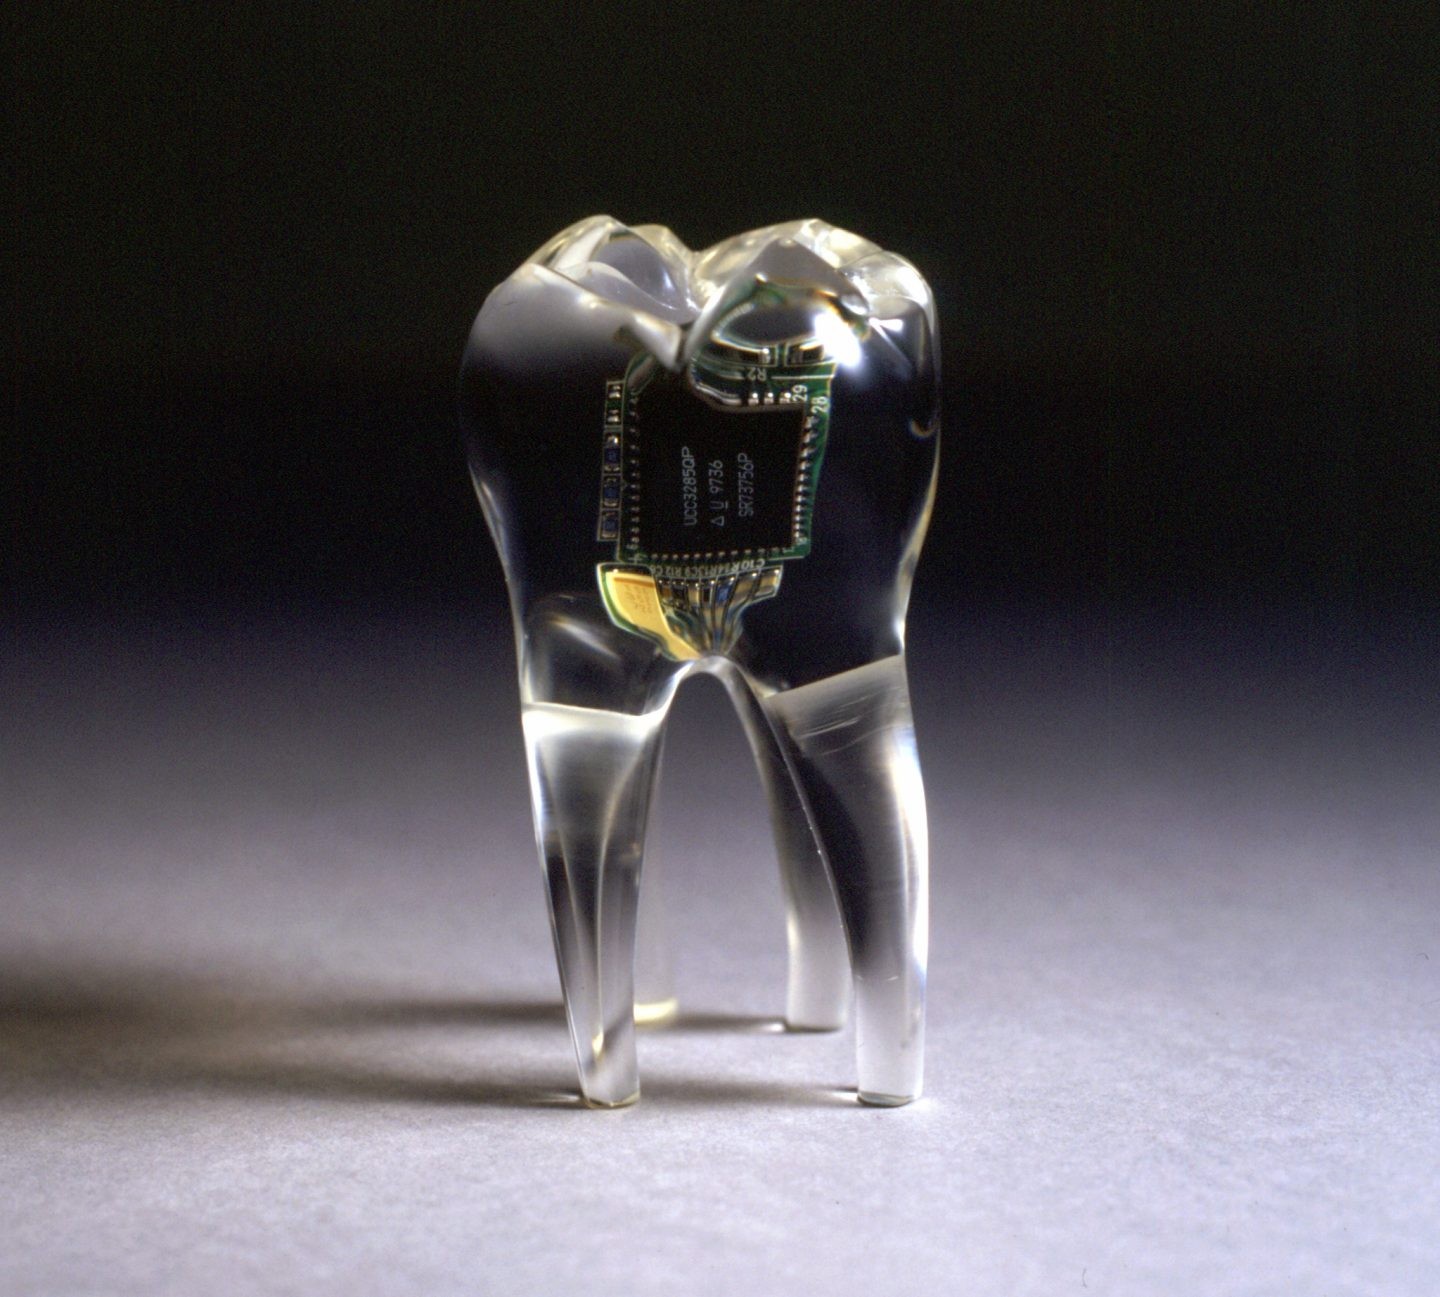 Audio Tooth Implant, Auger-Loizeau, 2000